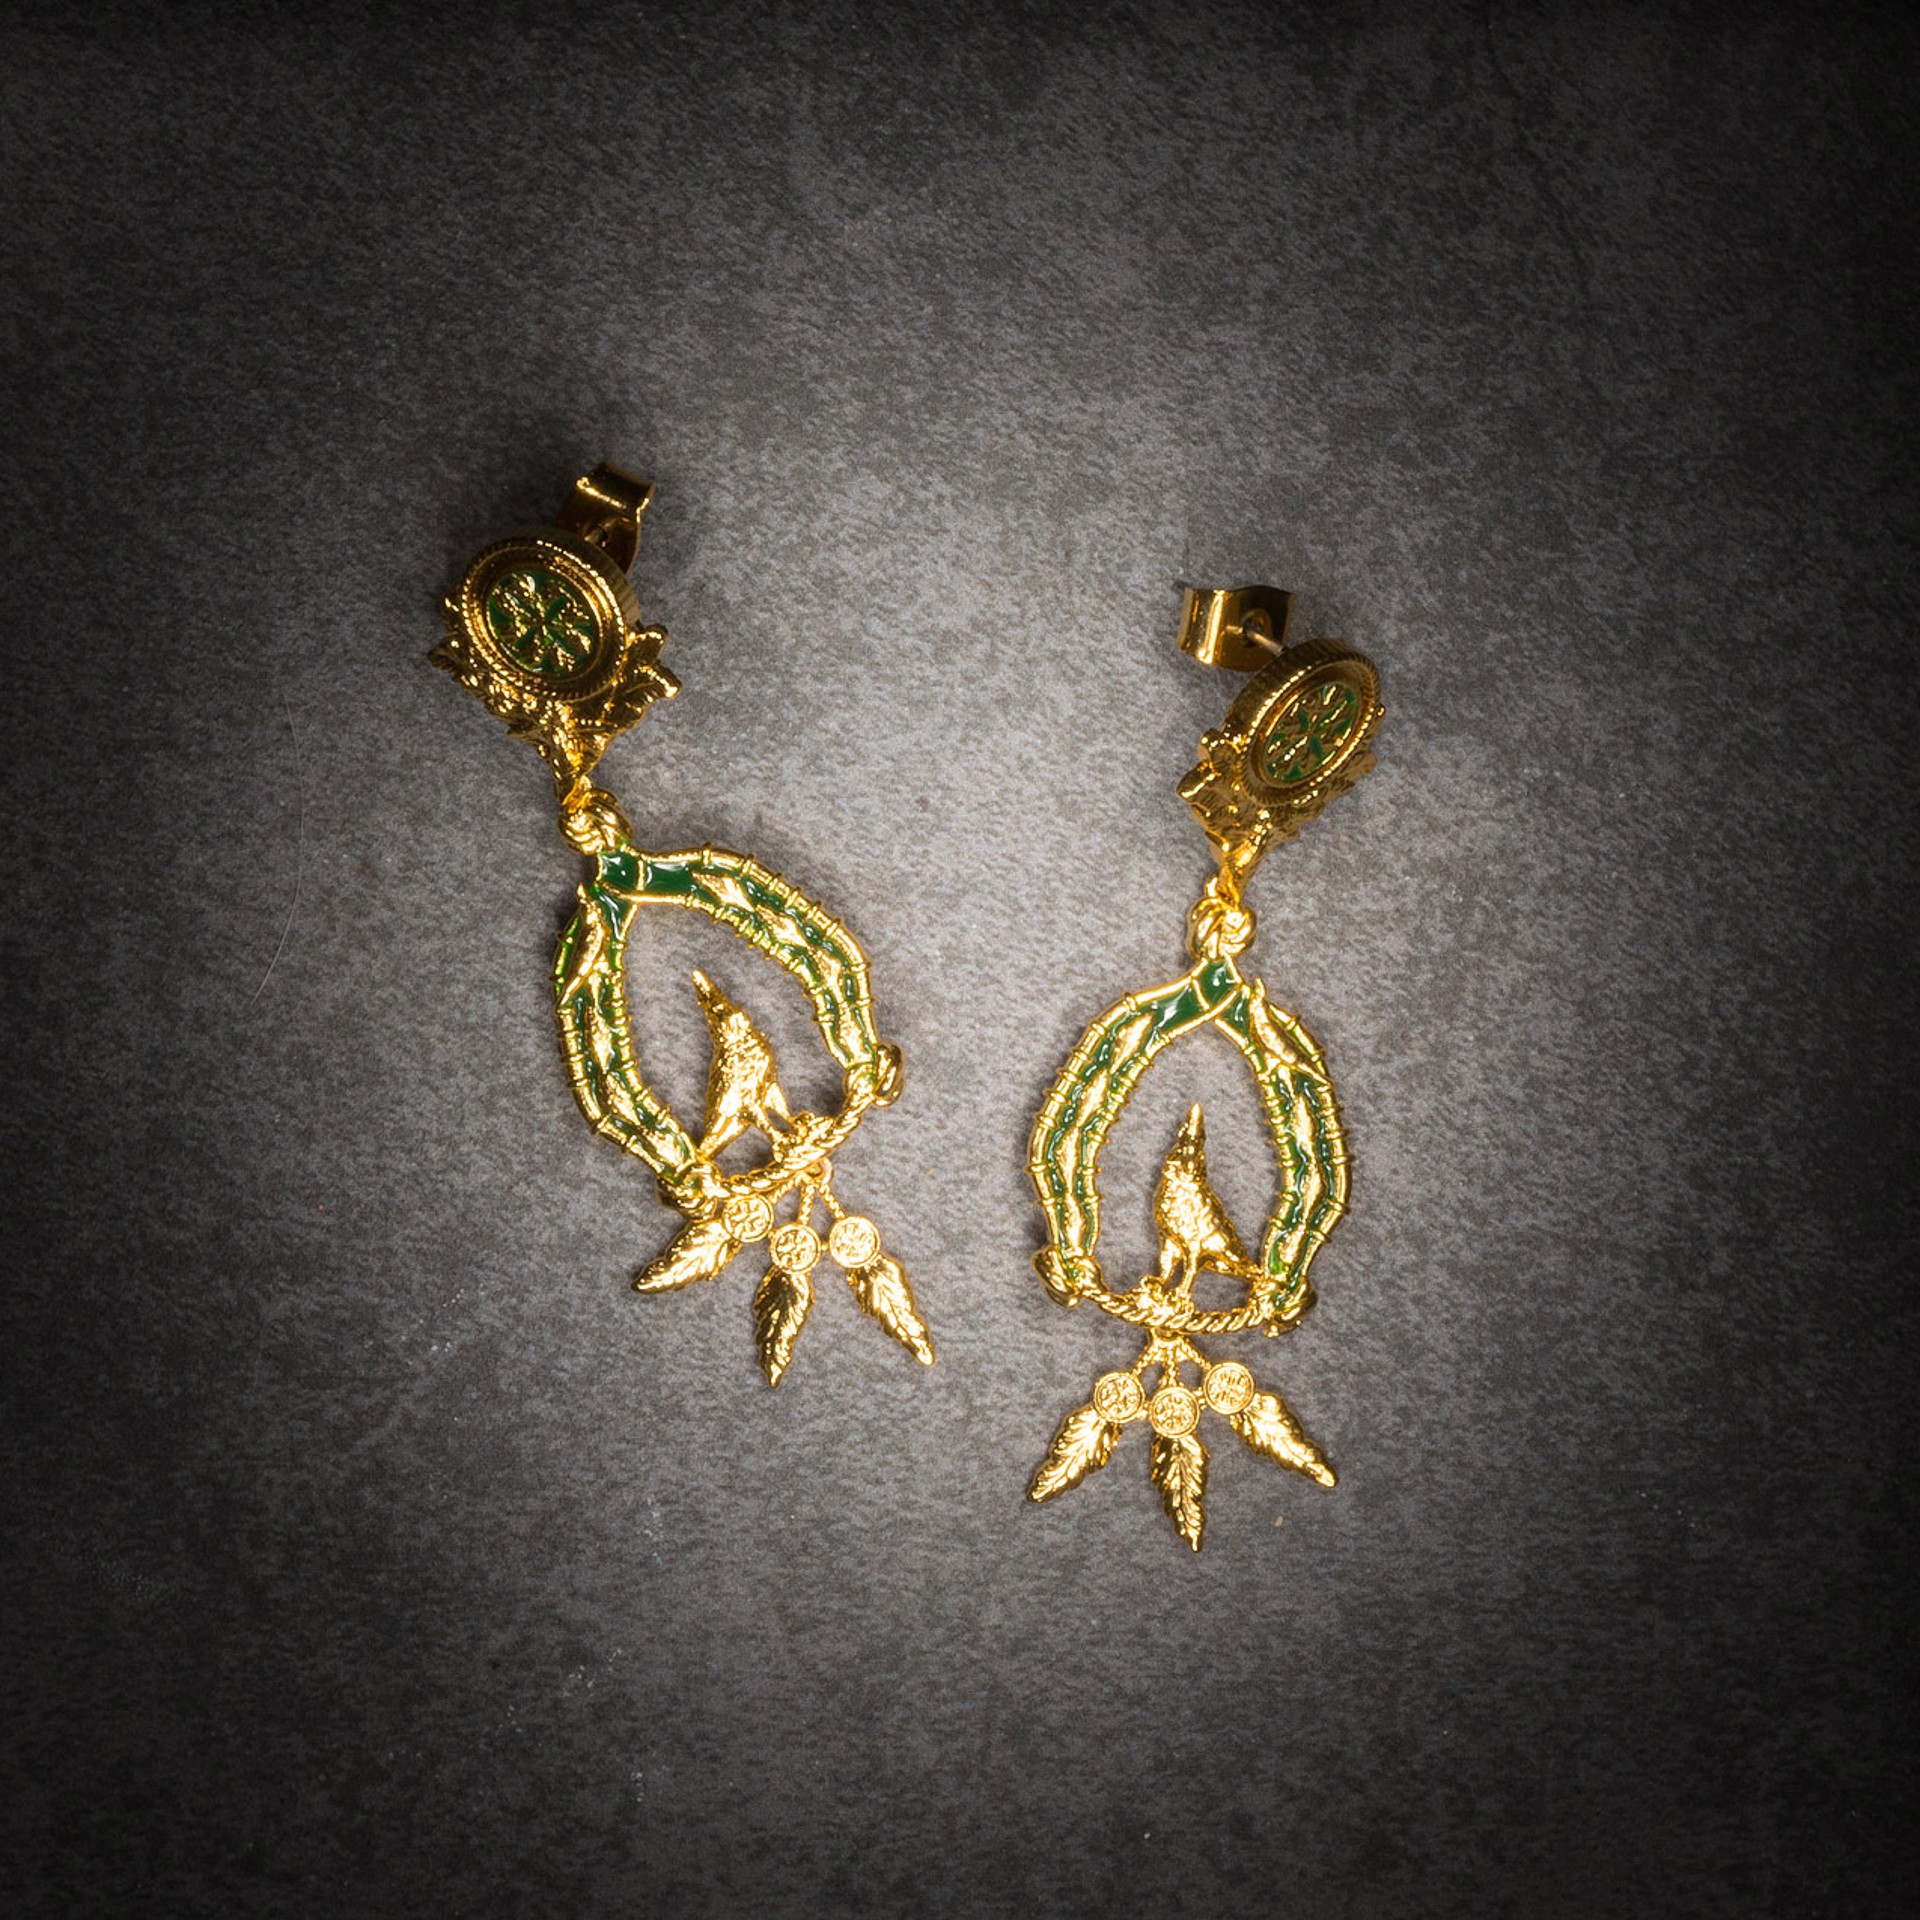 Vigor Earrings with Feathers - Gold & Green by Angela Mia